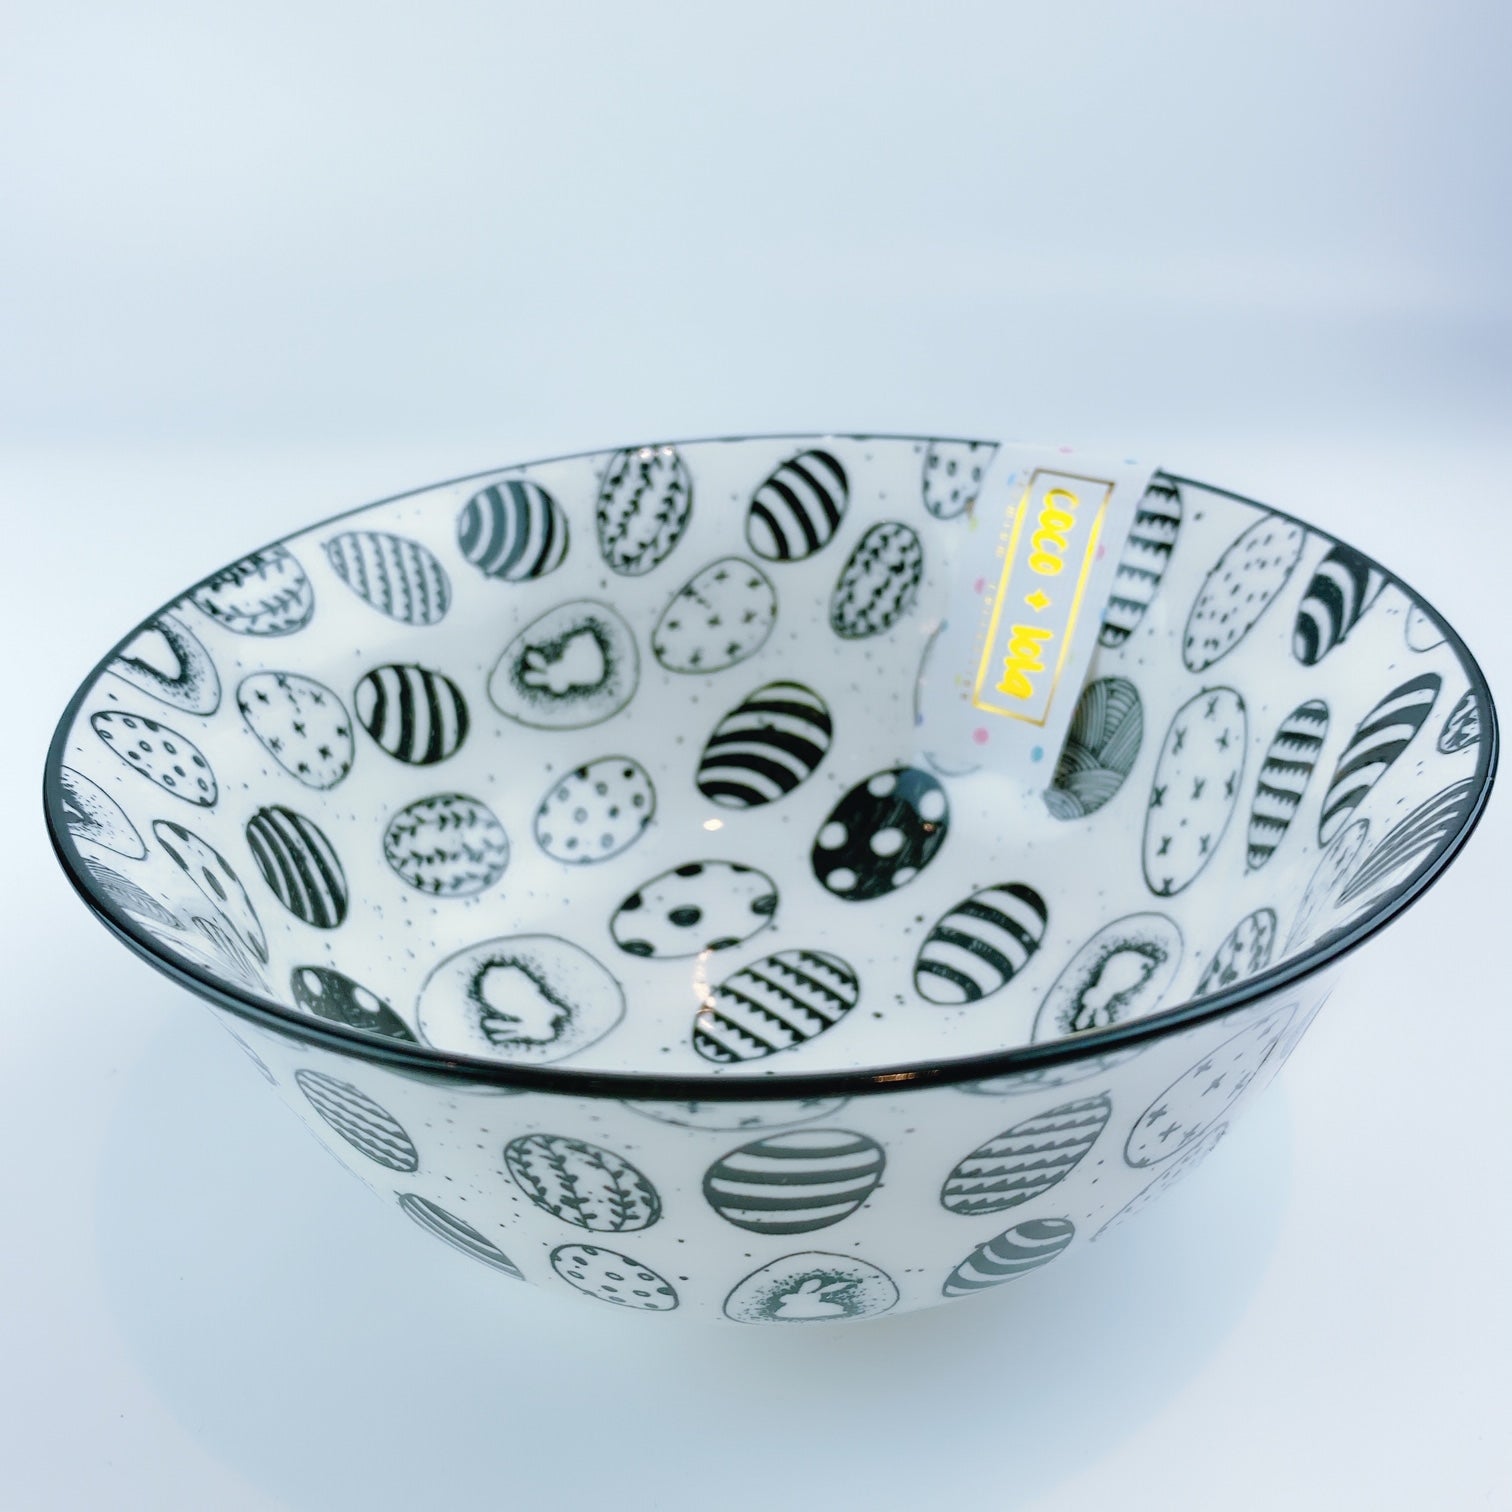 Coco + Lola Black And White Easter Eggs Bowl Large 22oz – Pit-a-Pats.com